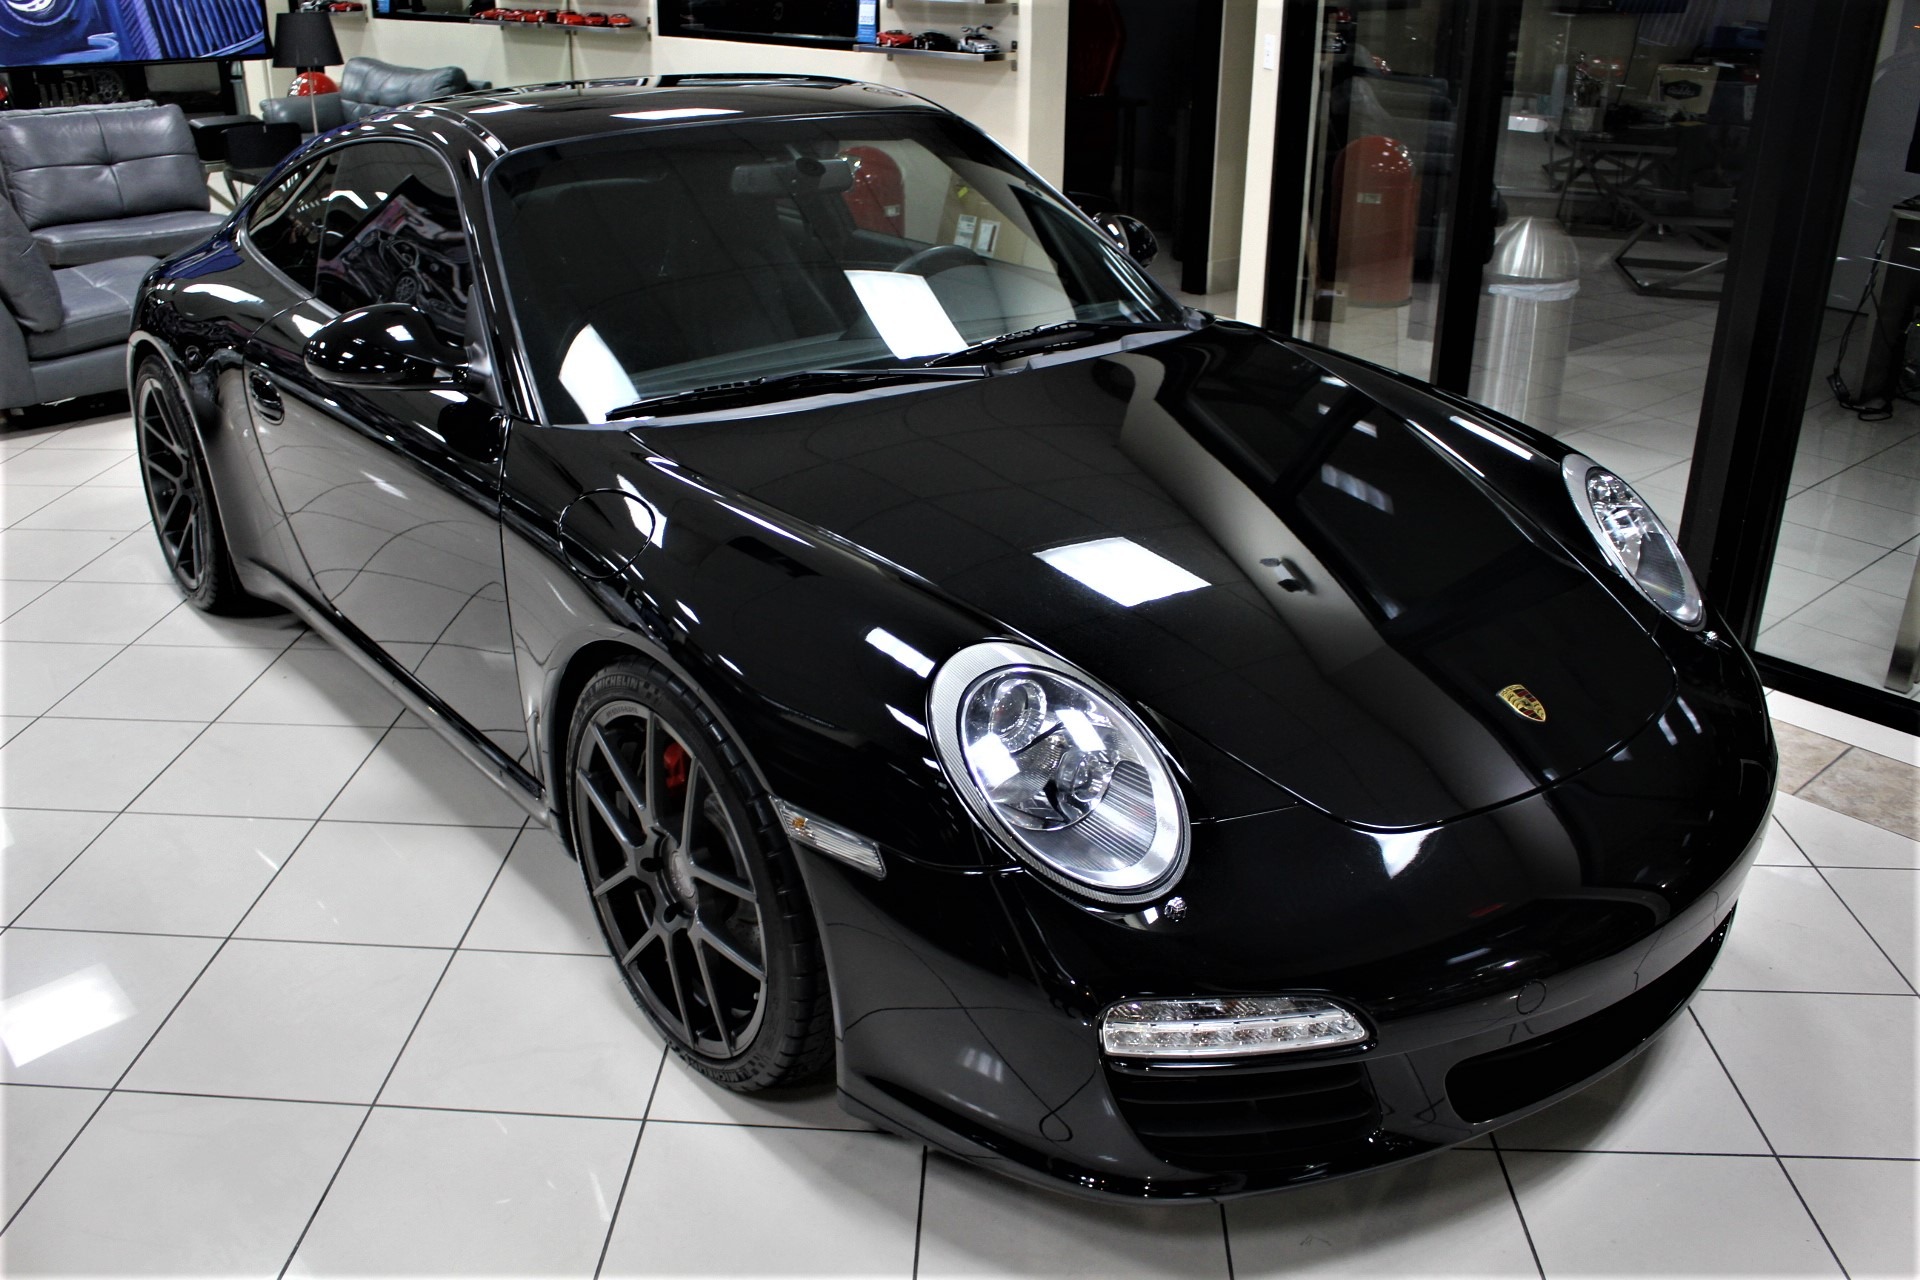 Used 2009 Porsche 911 Carrera S for sale Sold at The Gables Sports Cars in Miami FL 33146 3